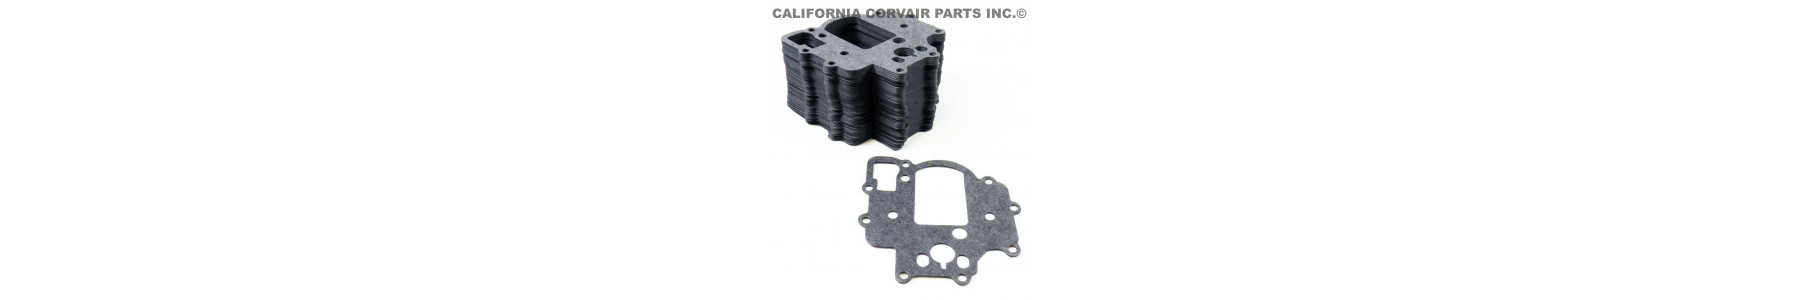 NEW CARB GASKETS